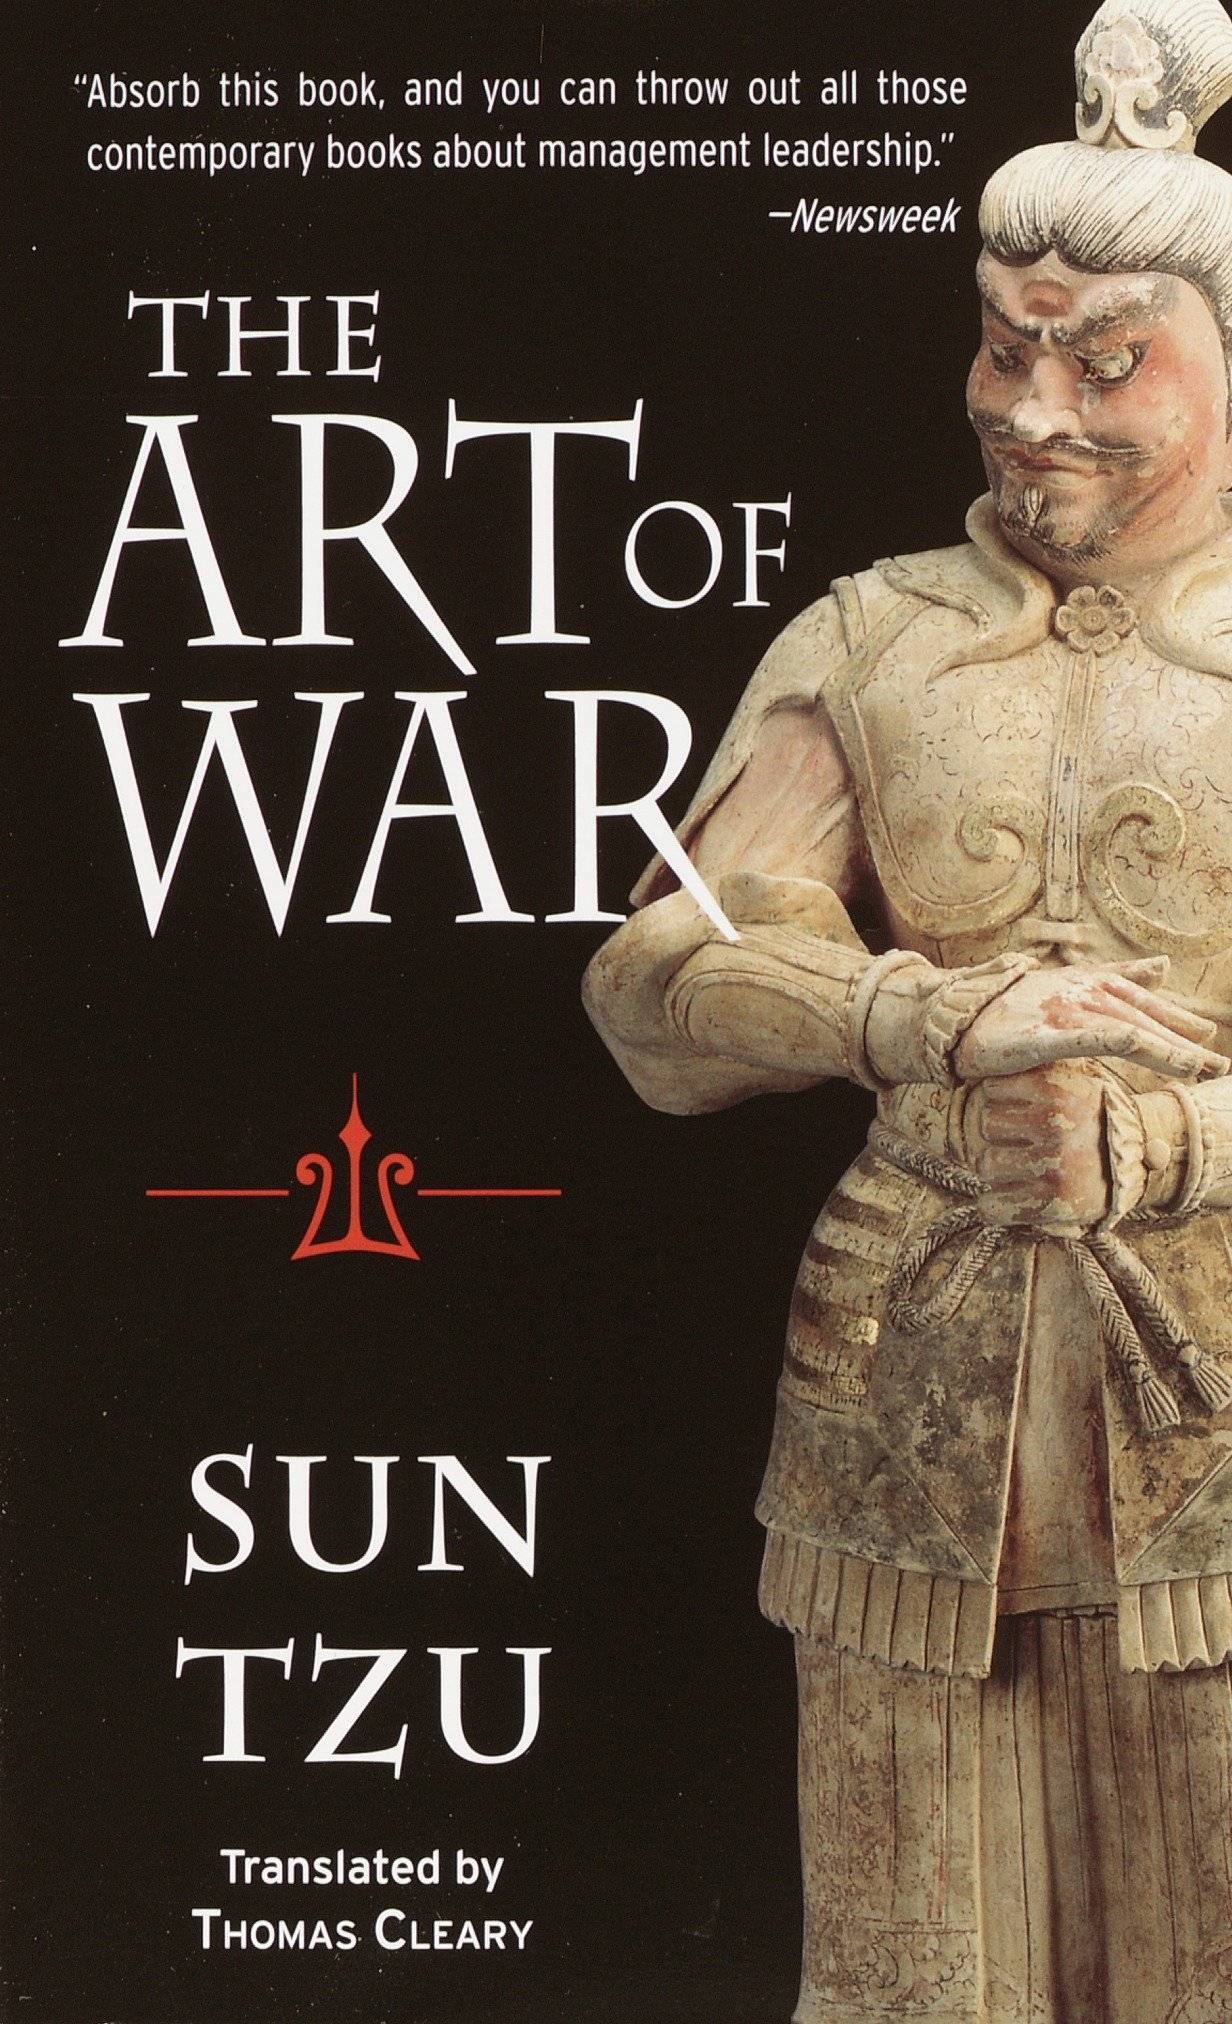 Sun Tzu's <em>The Art of War</em>, translated by Thomas Cleary